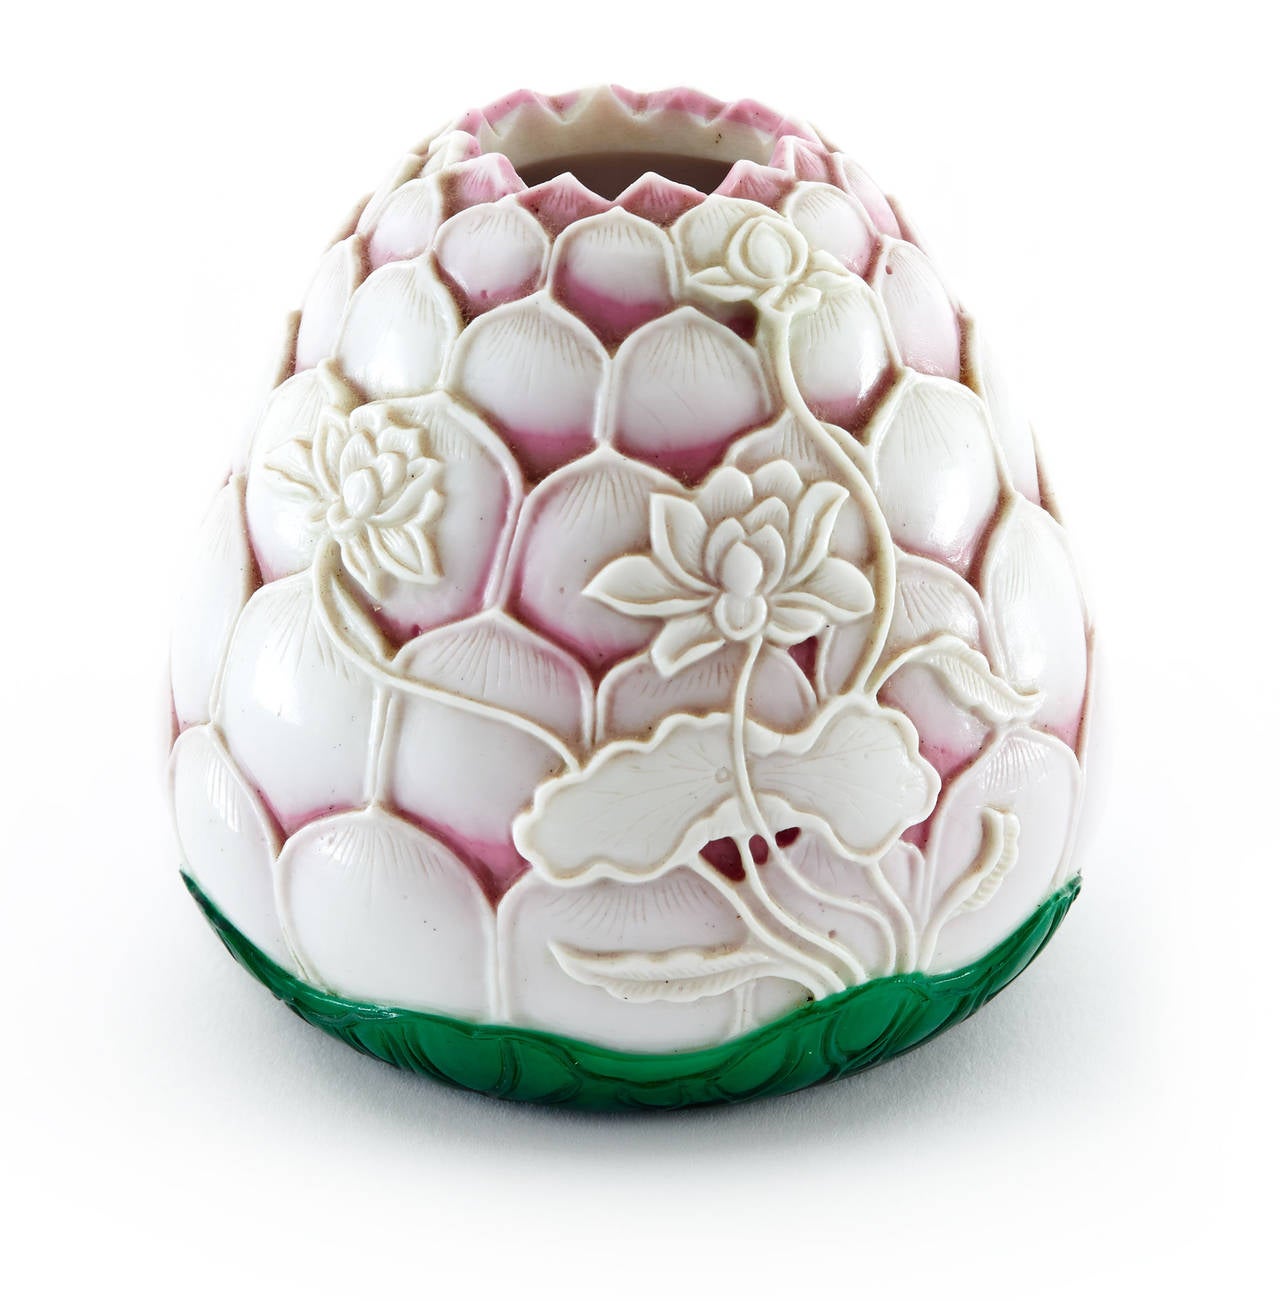 Very nice Chinese bowl, green, pink, white.
In form of a lotus bud.